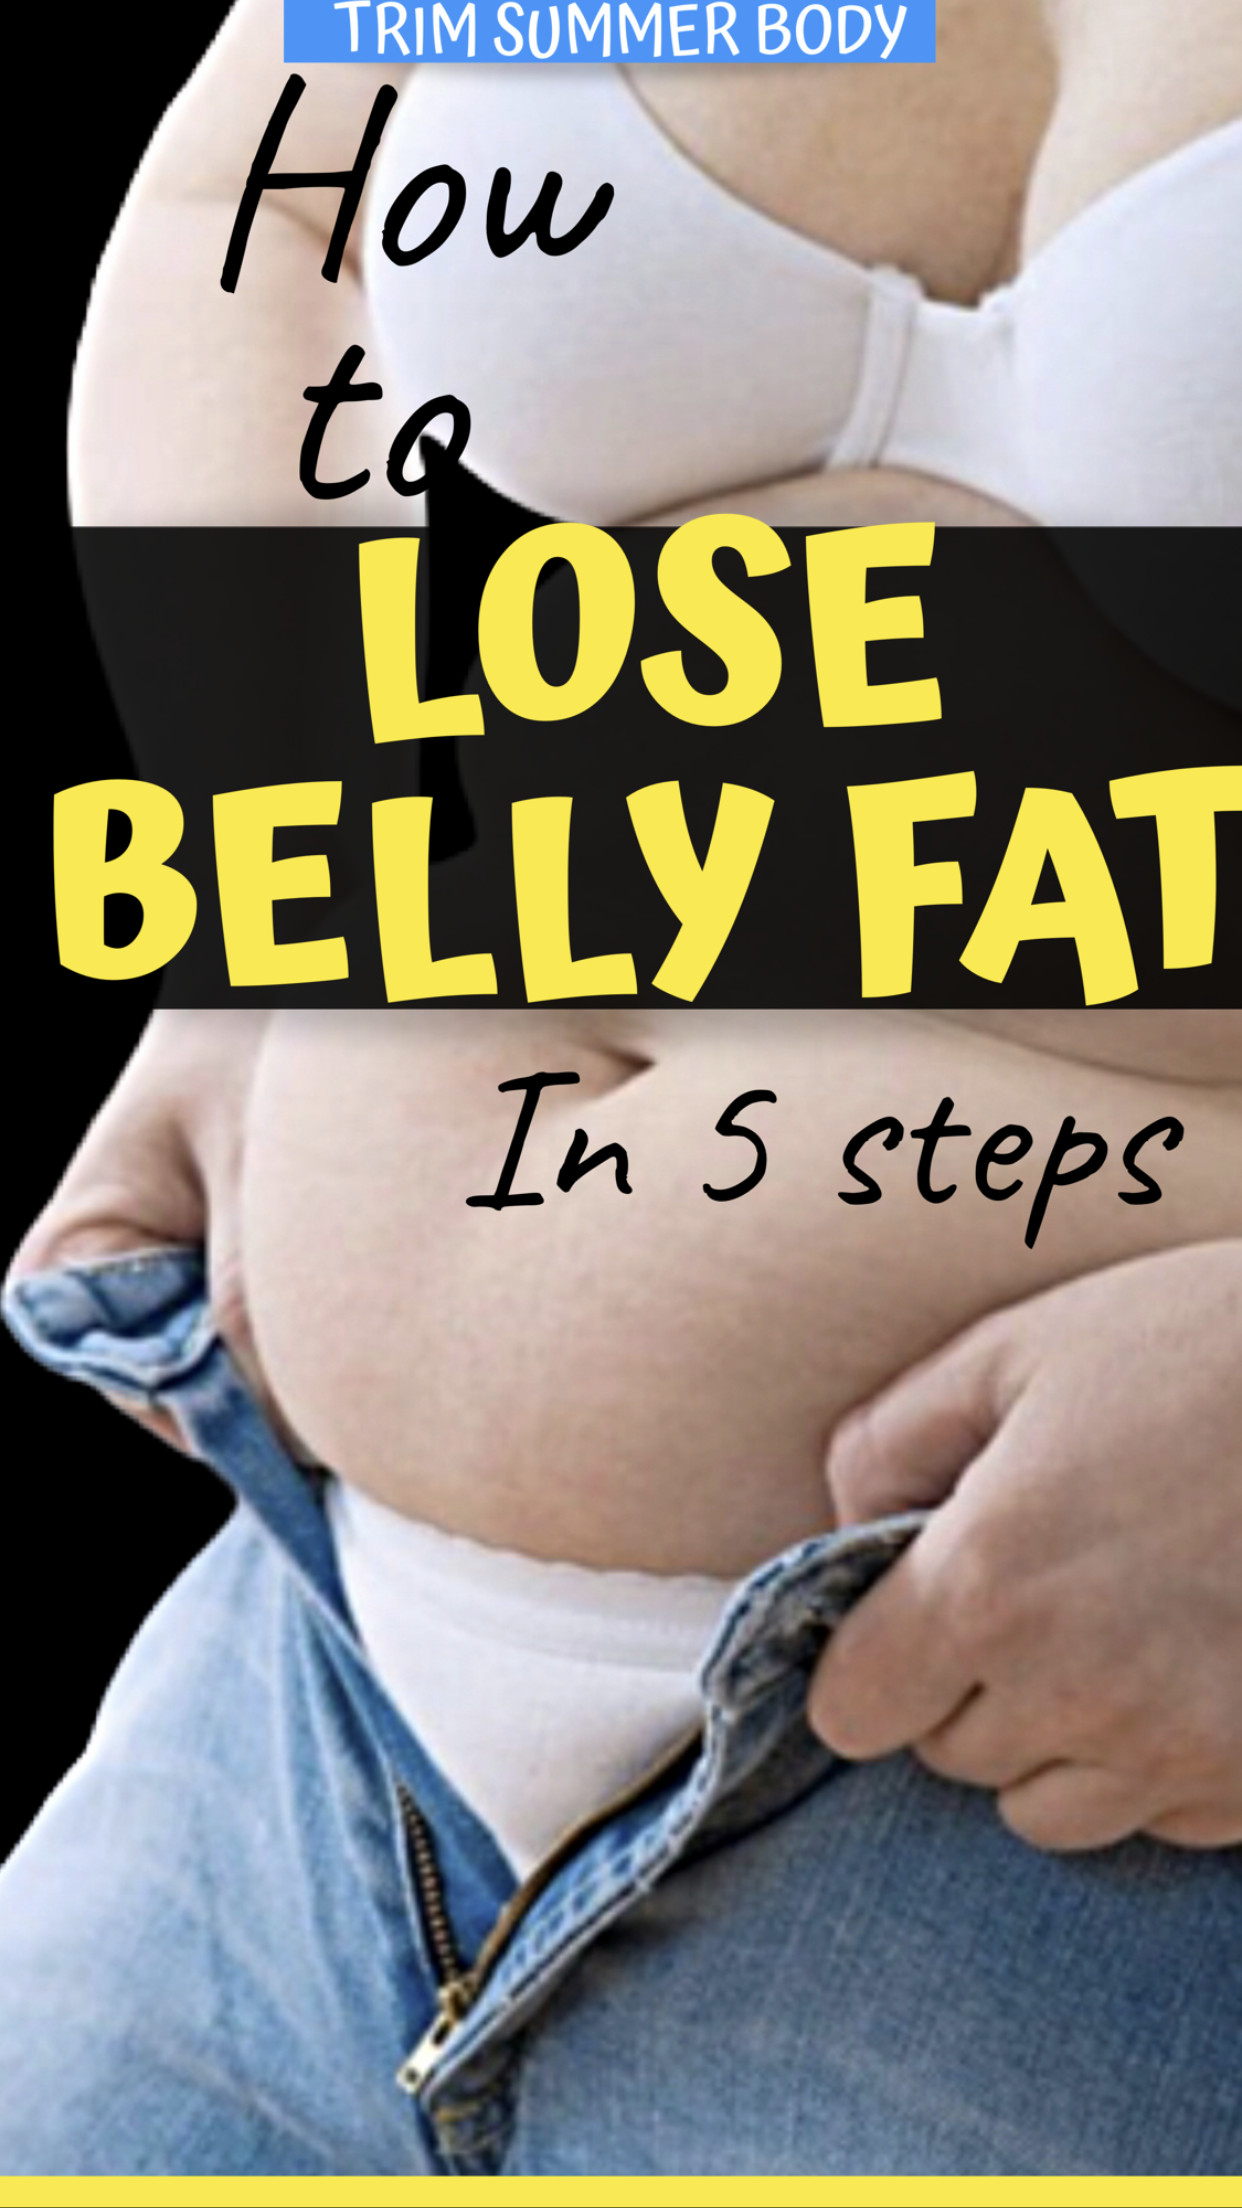 How To Lose Belly Fat Fast For Teens In A Week
 Pin on Weight Loss Tips